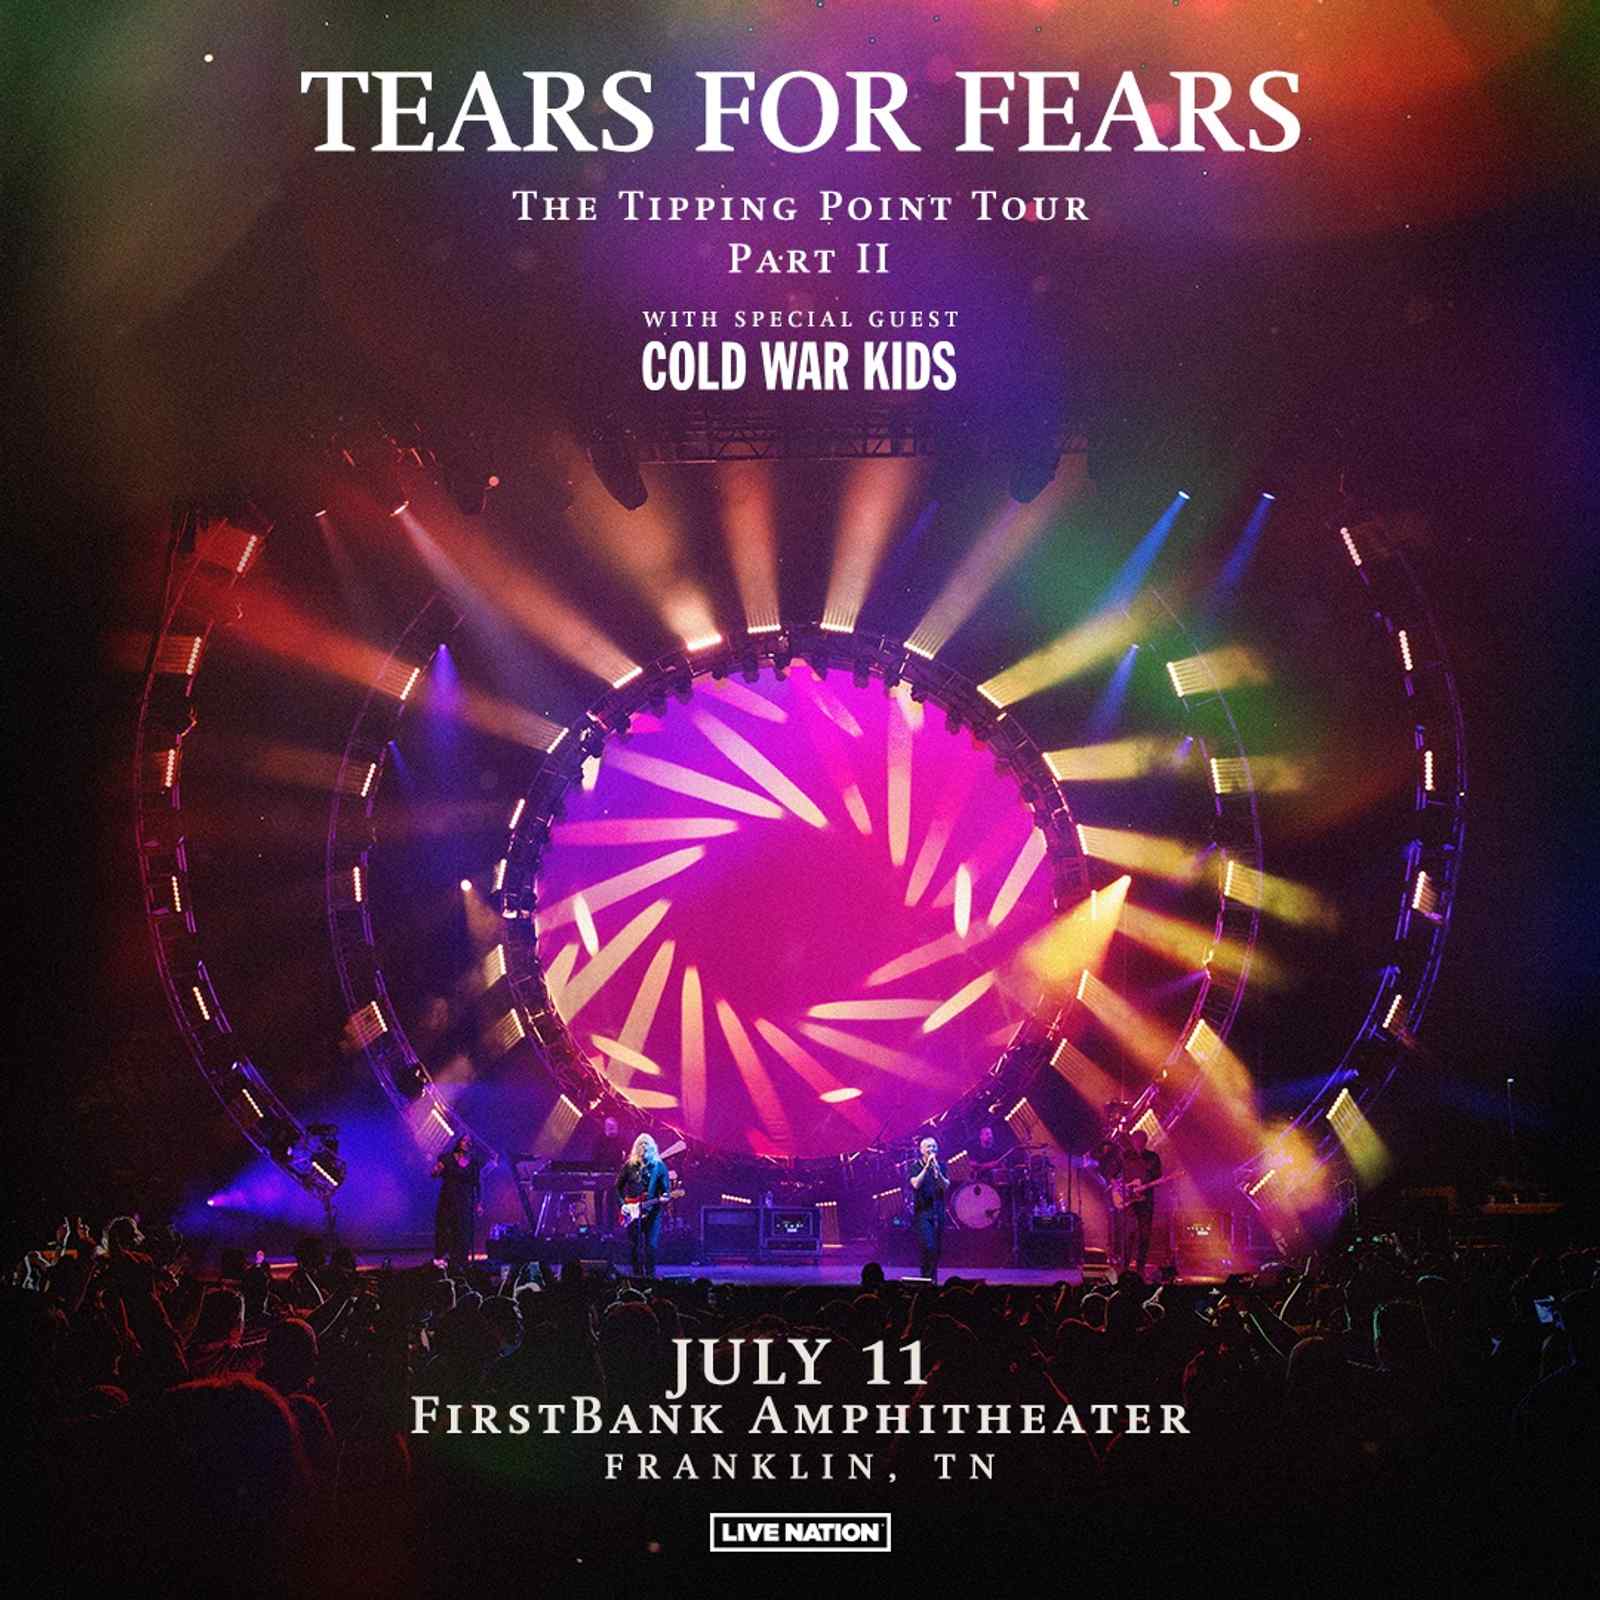 Tears For Fears The Tipping Point Tour Part II with special guests Cold War Kids - 7:30 PM